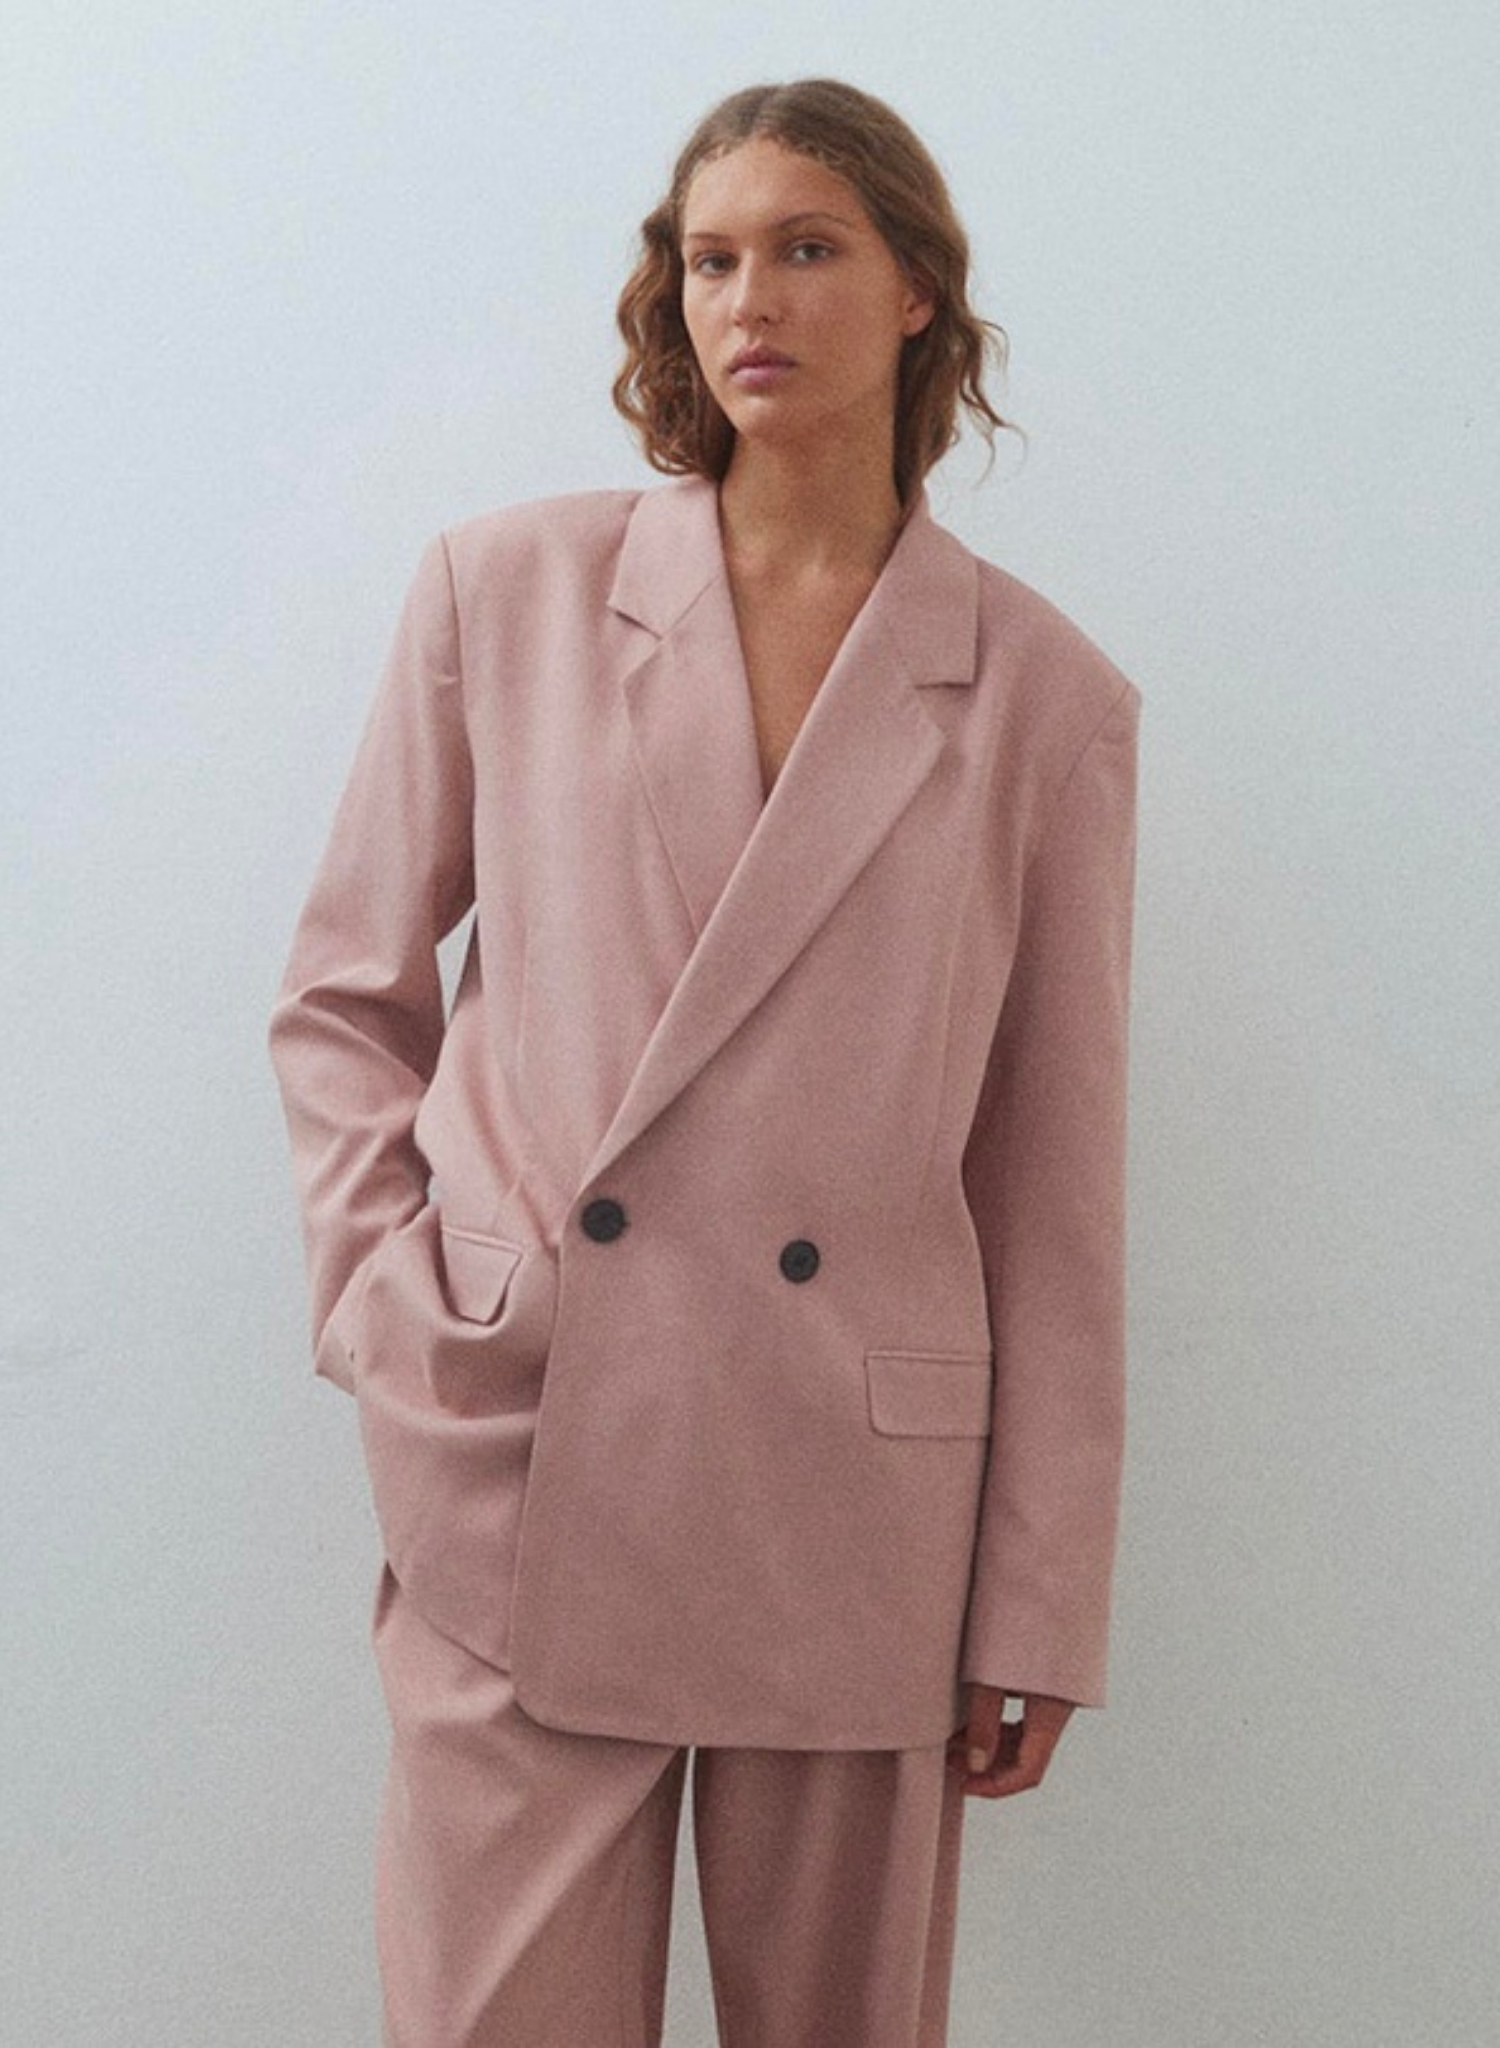 Introducing the Dana in Dusty Pink, a double-breasted suit jacket with charming lapels. This outerwear piece takes notes from men’s tailoring with considered darts for definition at the waist.